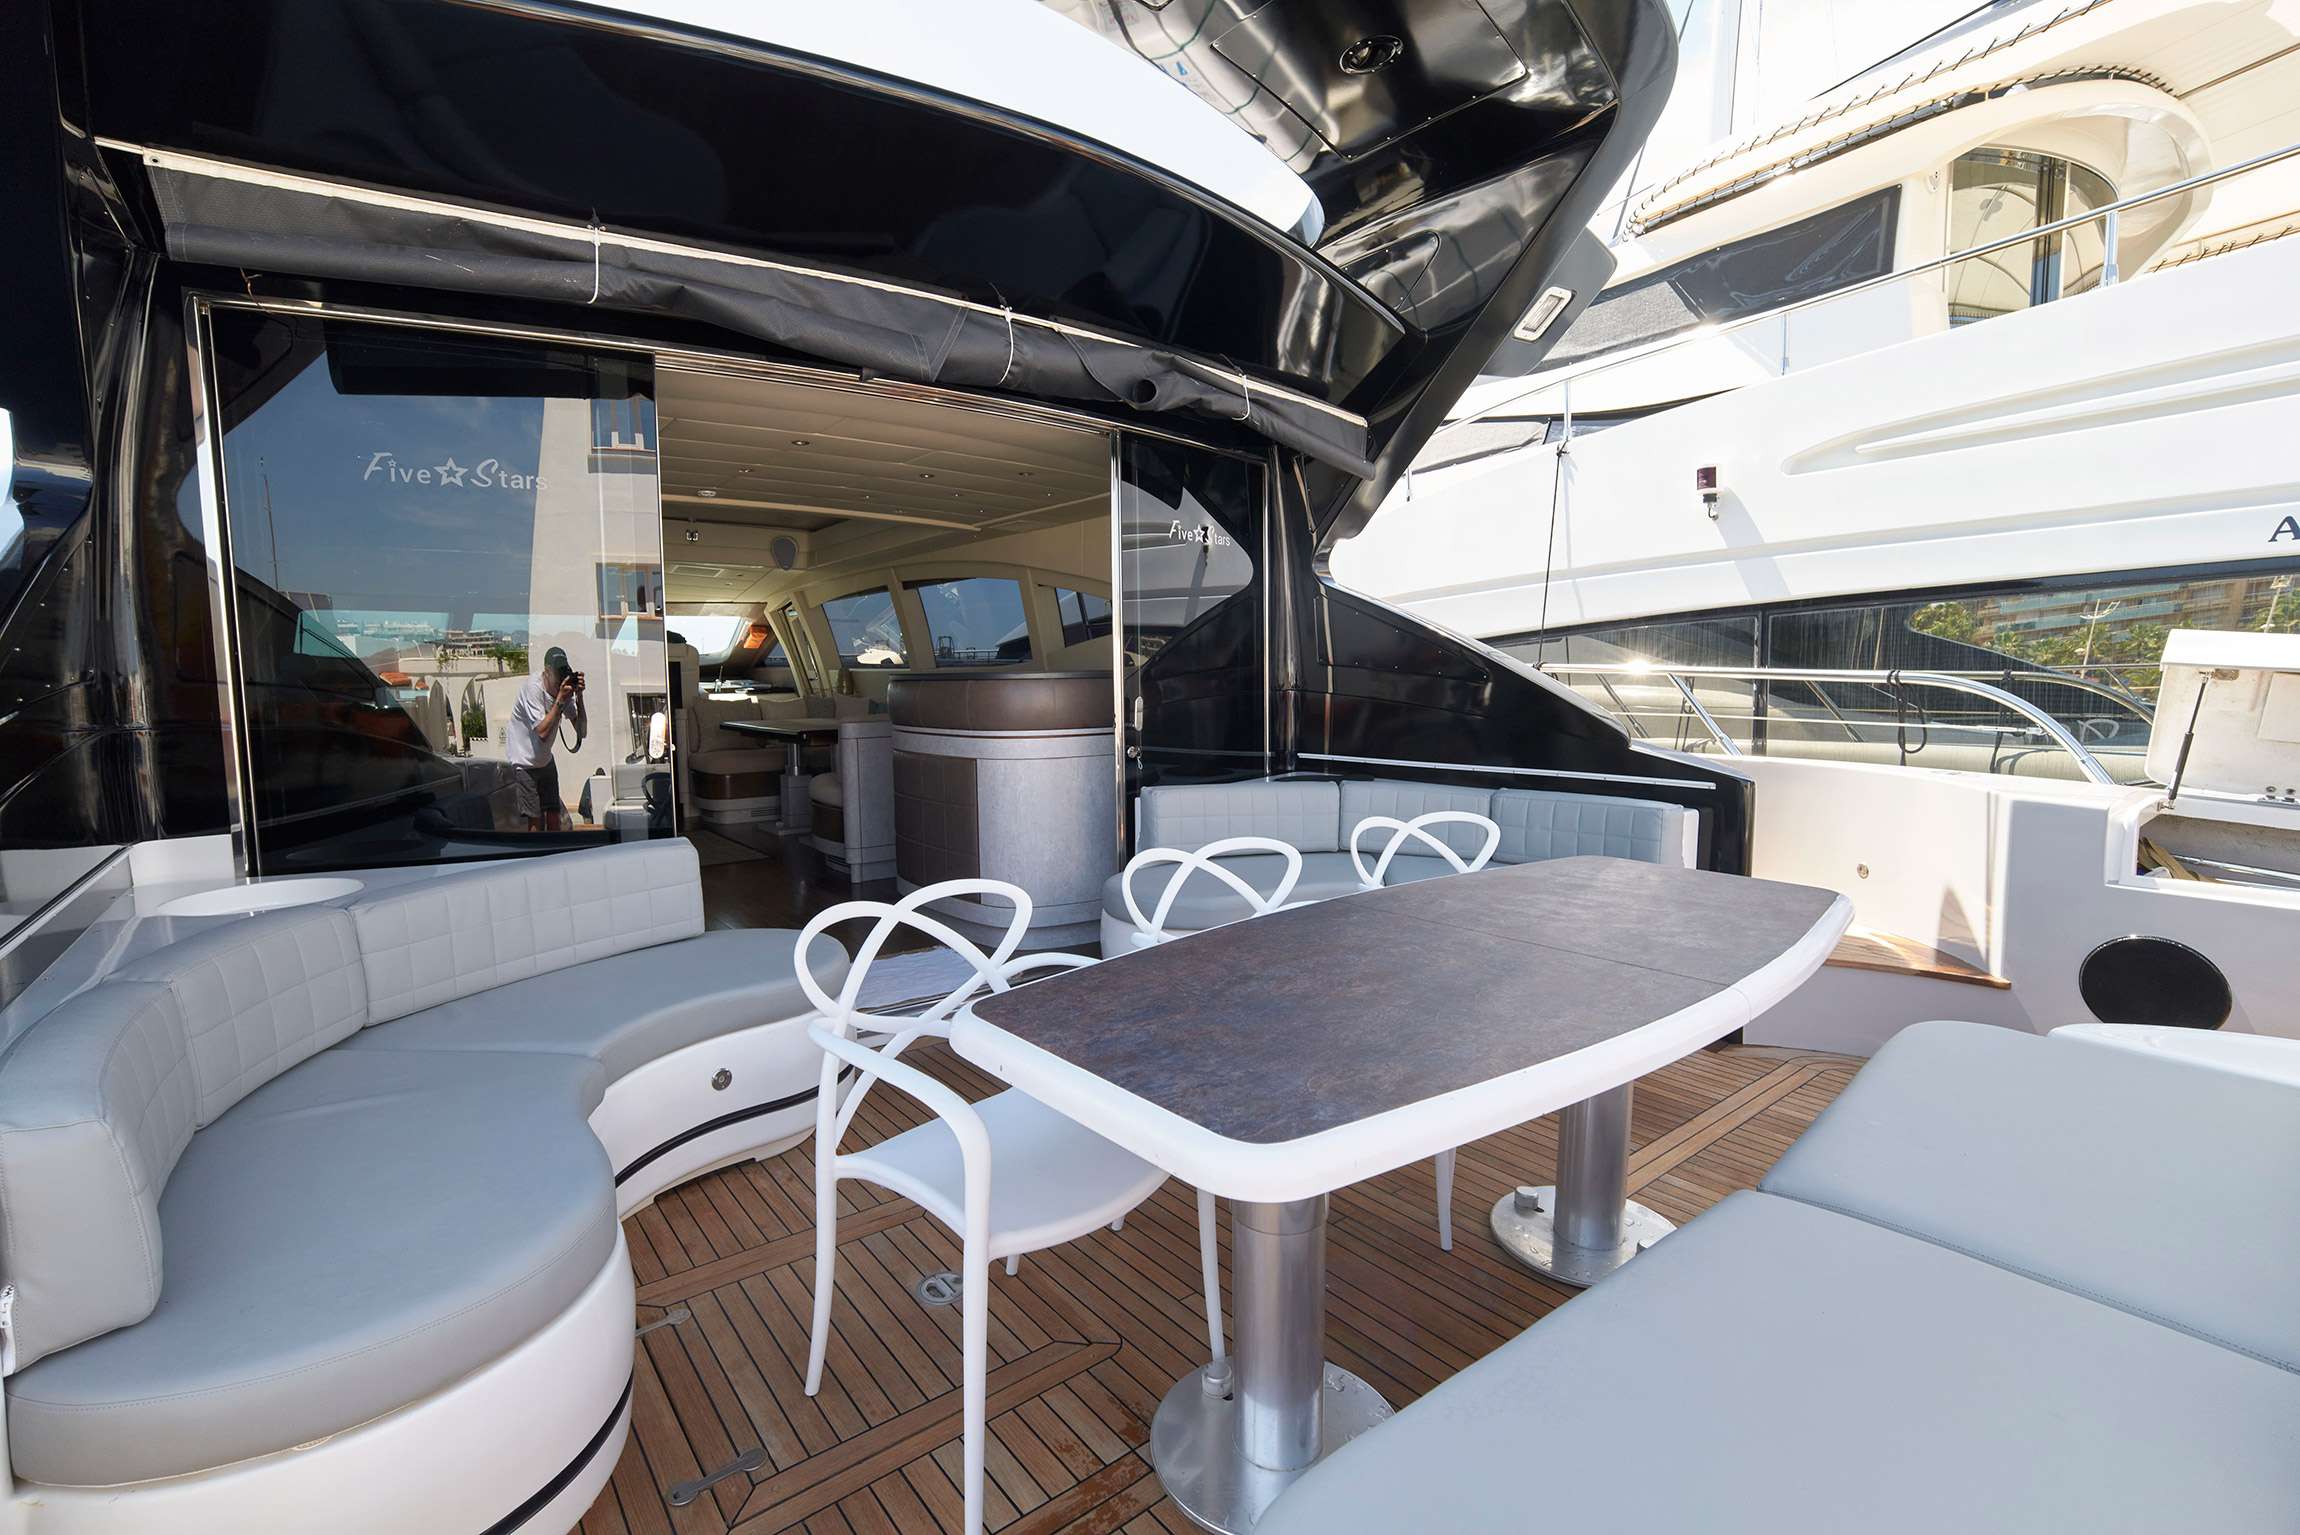 FIVE STARS - Yacht Charter Roses & Boat hire in Balearics & Spain 3